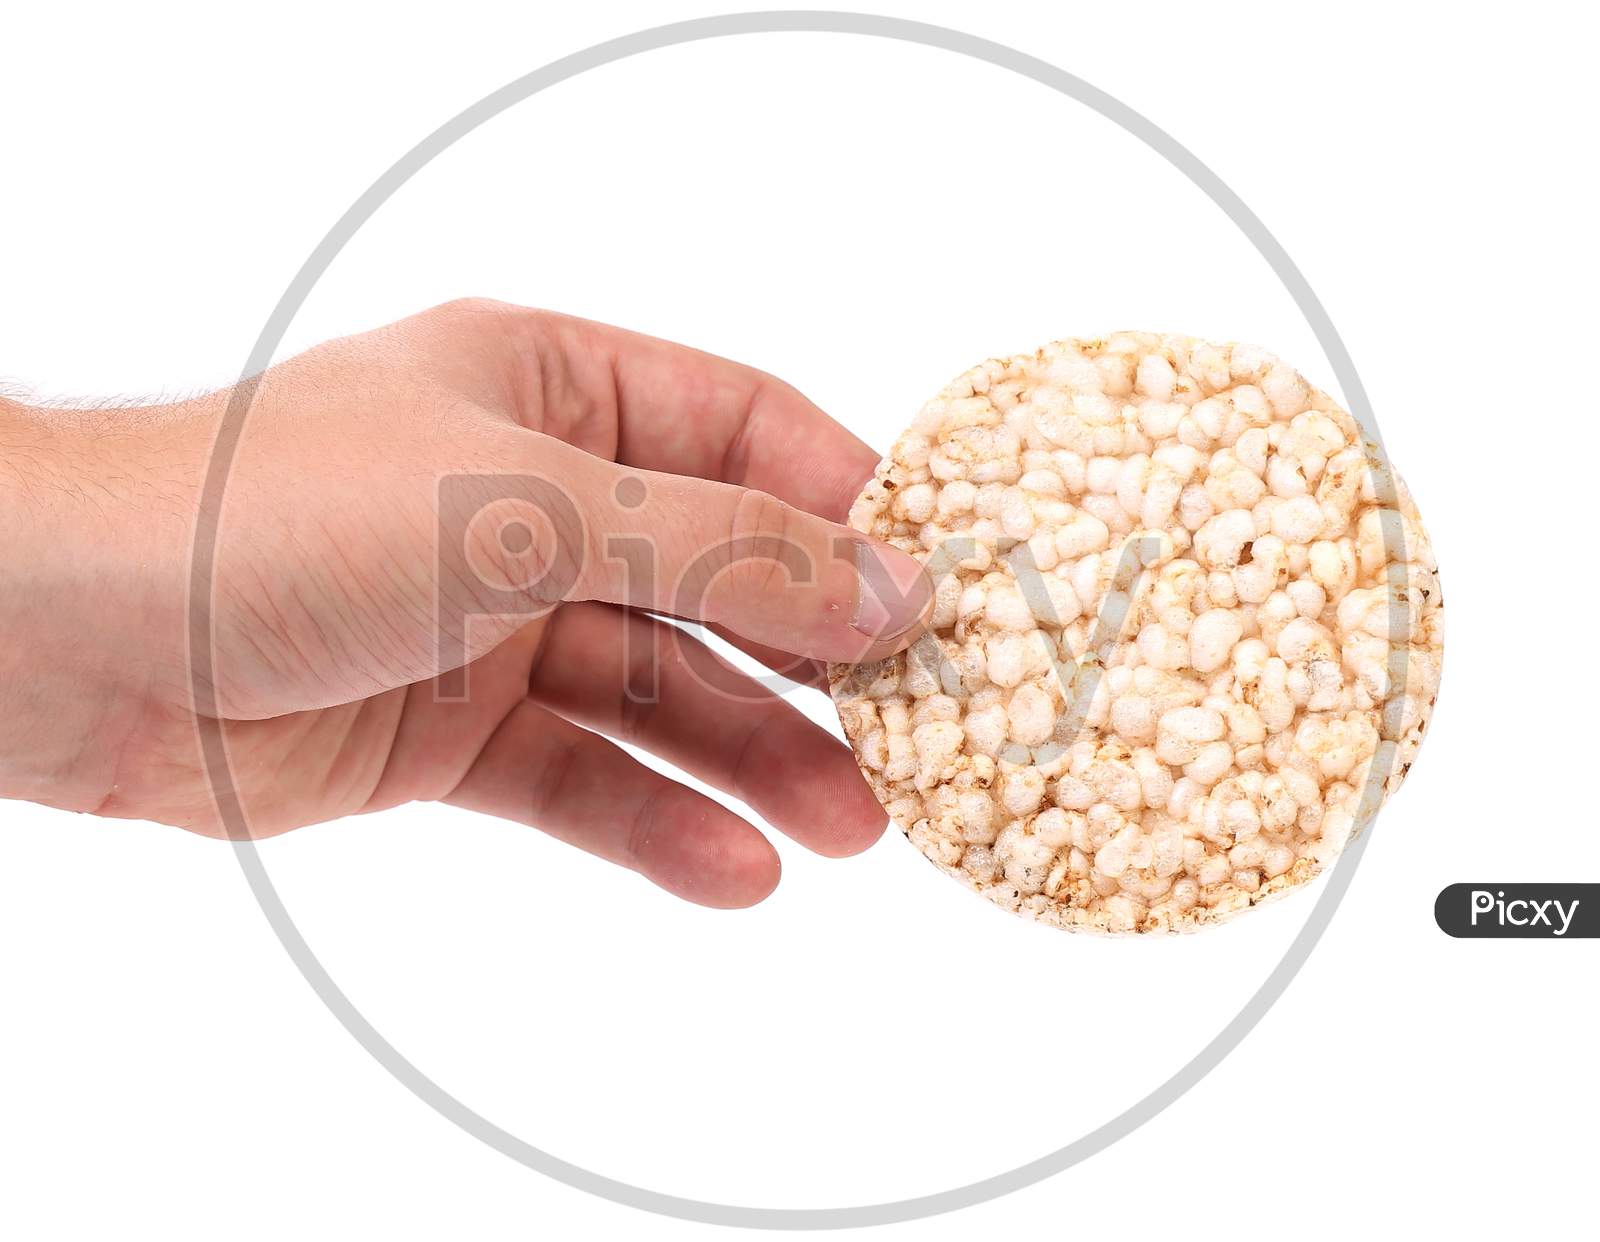 Puffed Rice Snack In Hand. Isolated On A White Background.